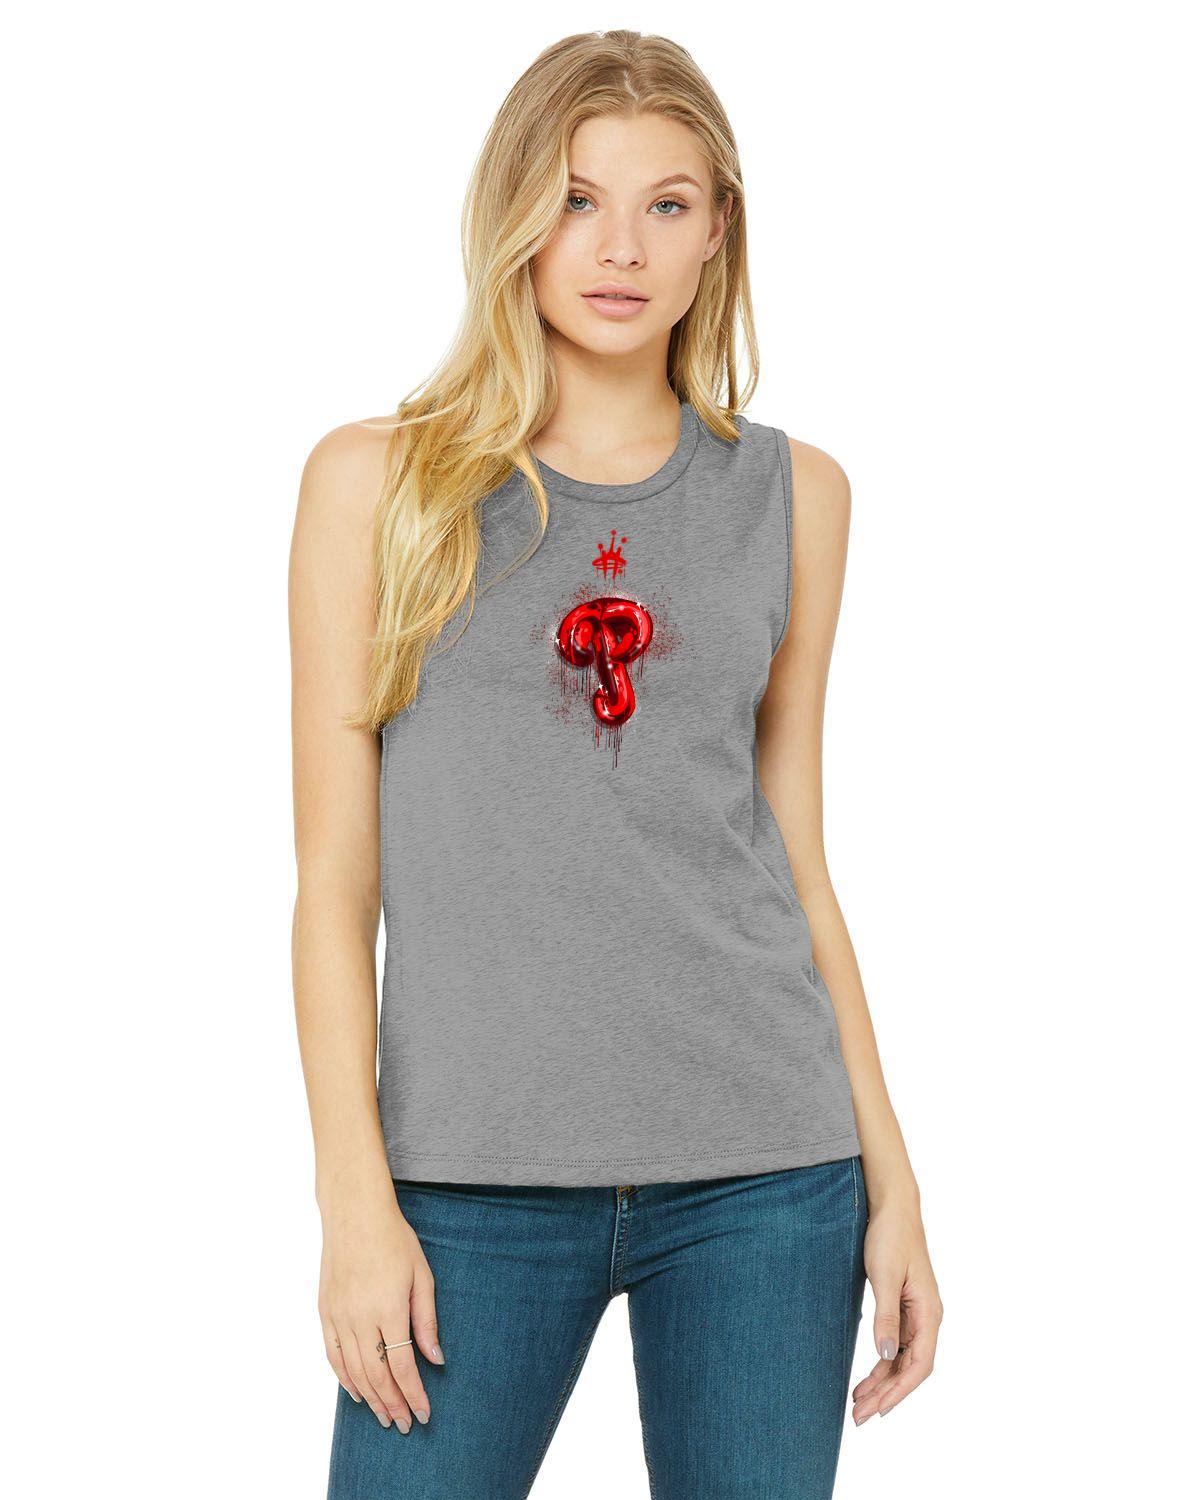 Philly Dimensional Ladies Tank (Bella + Canvas Ladies' Jersey Muscle Tank | B6003)